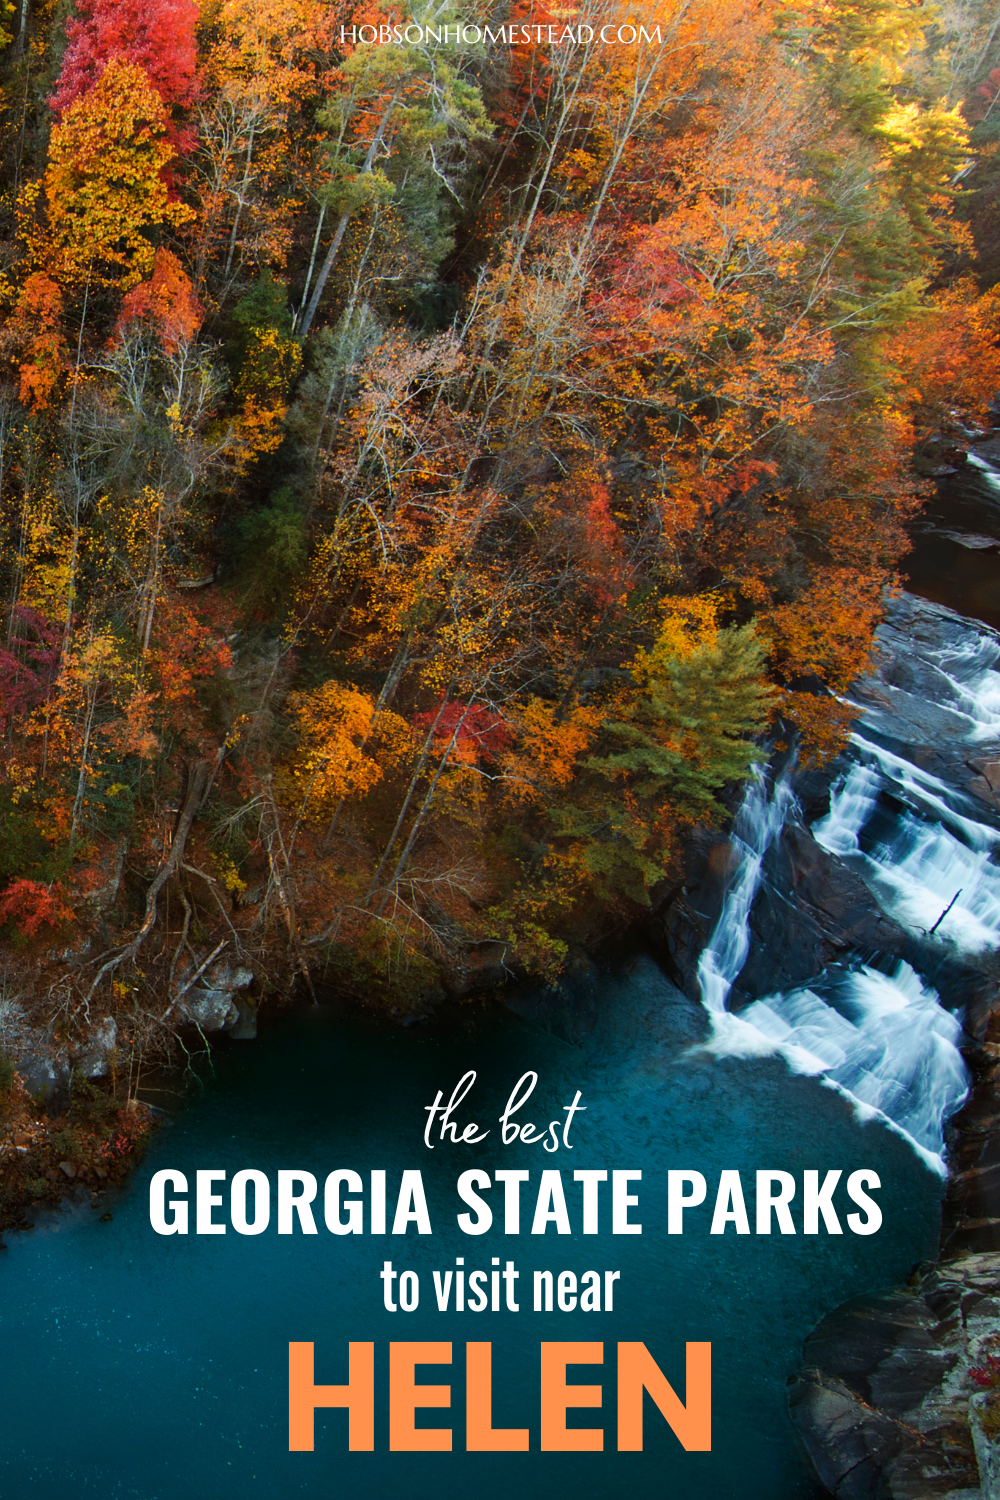 The Best Georgia State Parks to Visit Near Helen